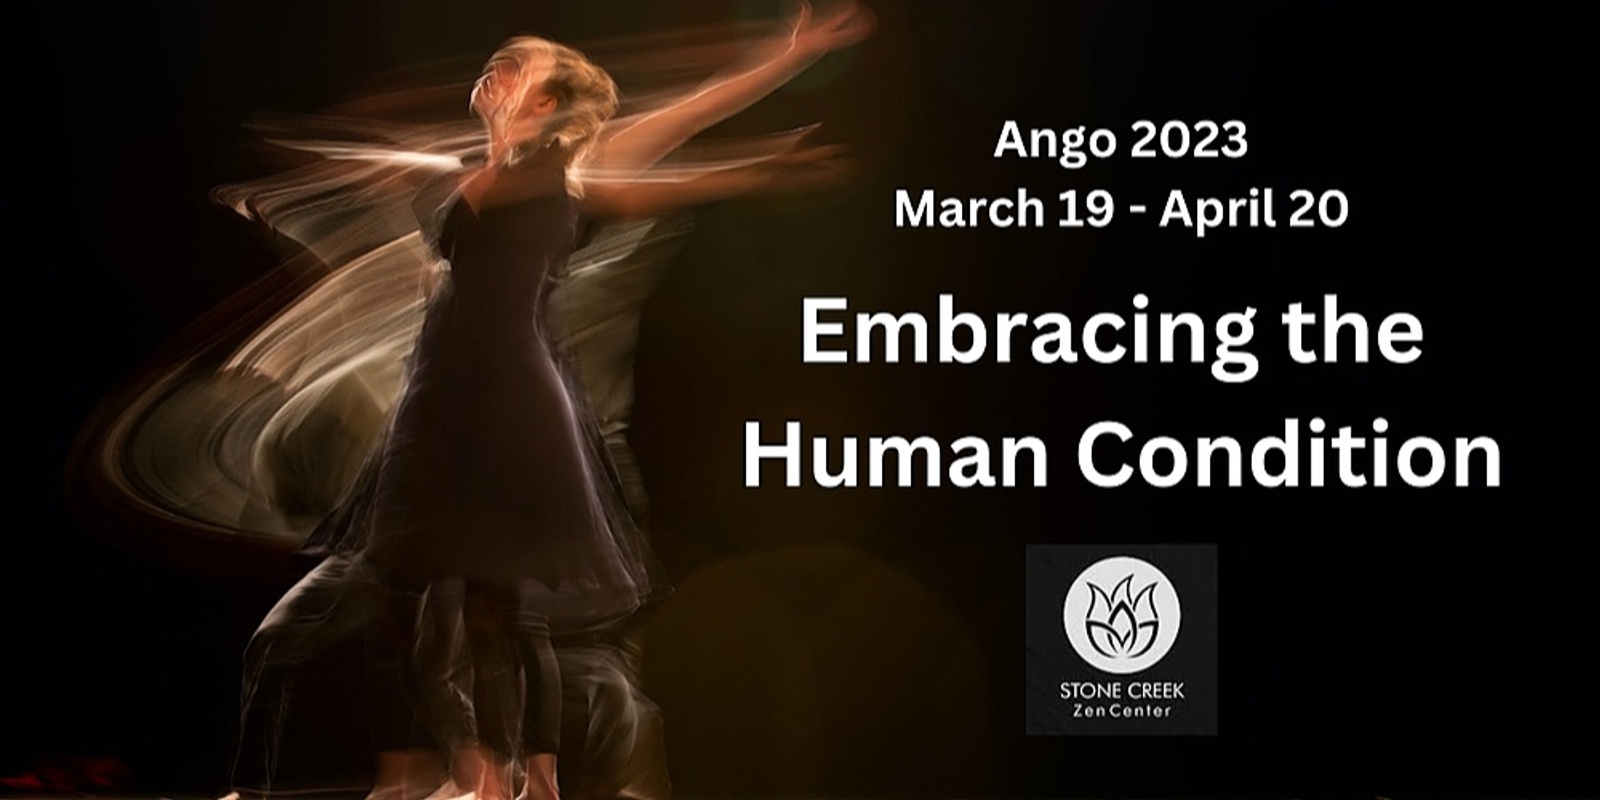 Banner image for Stone Creek Ango Spring 2023 - Embracing the Human Condition